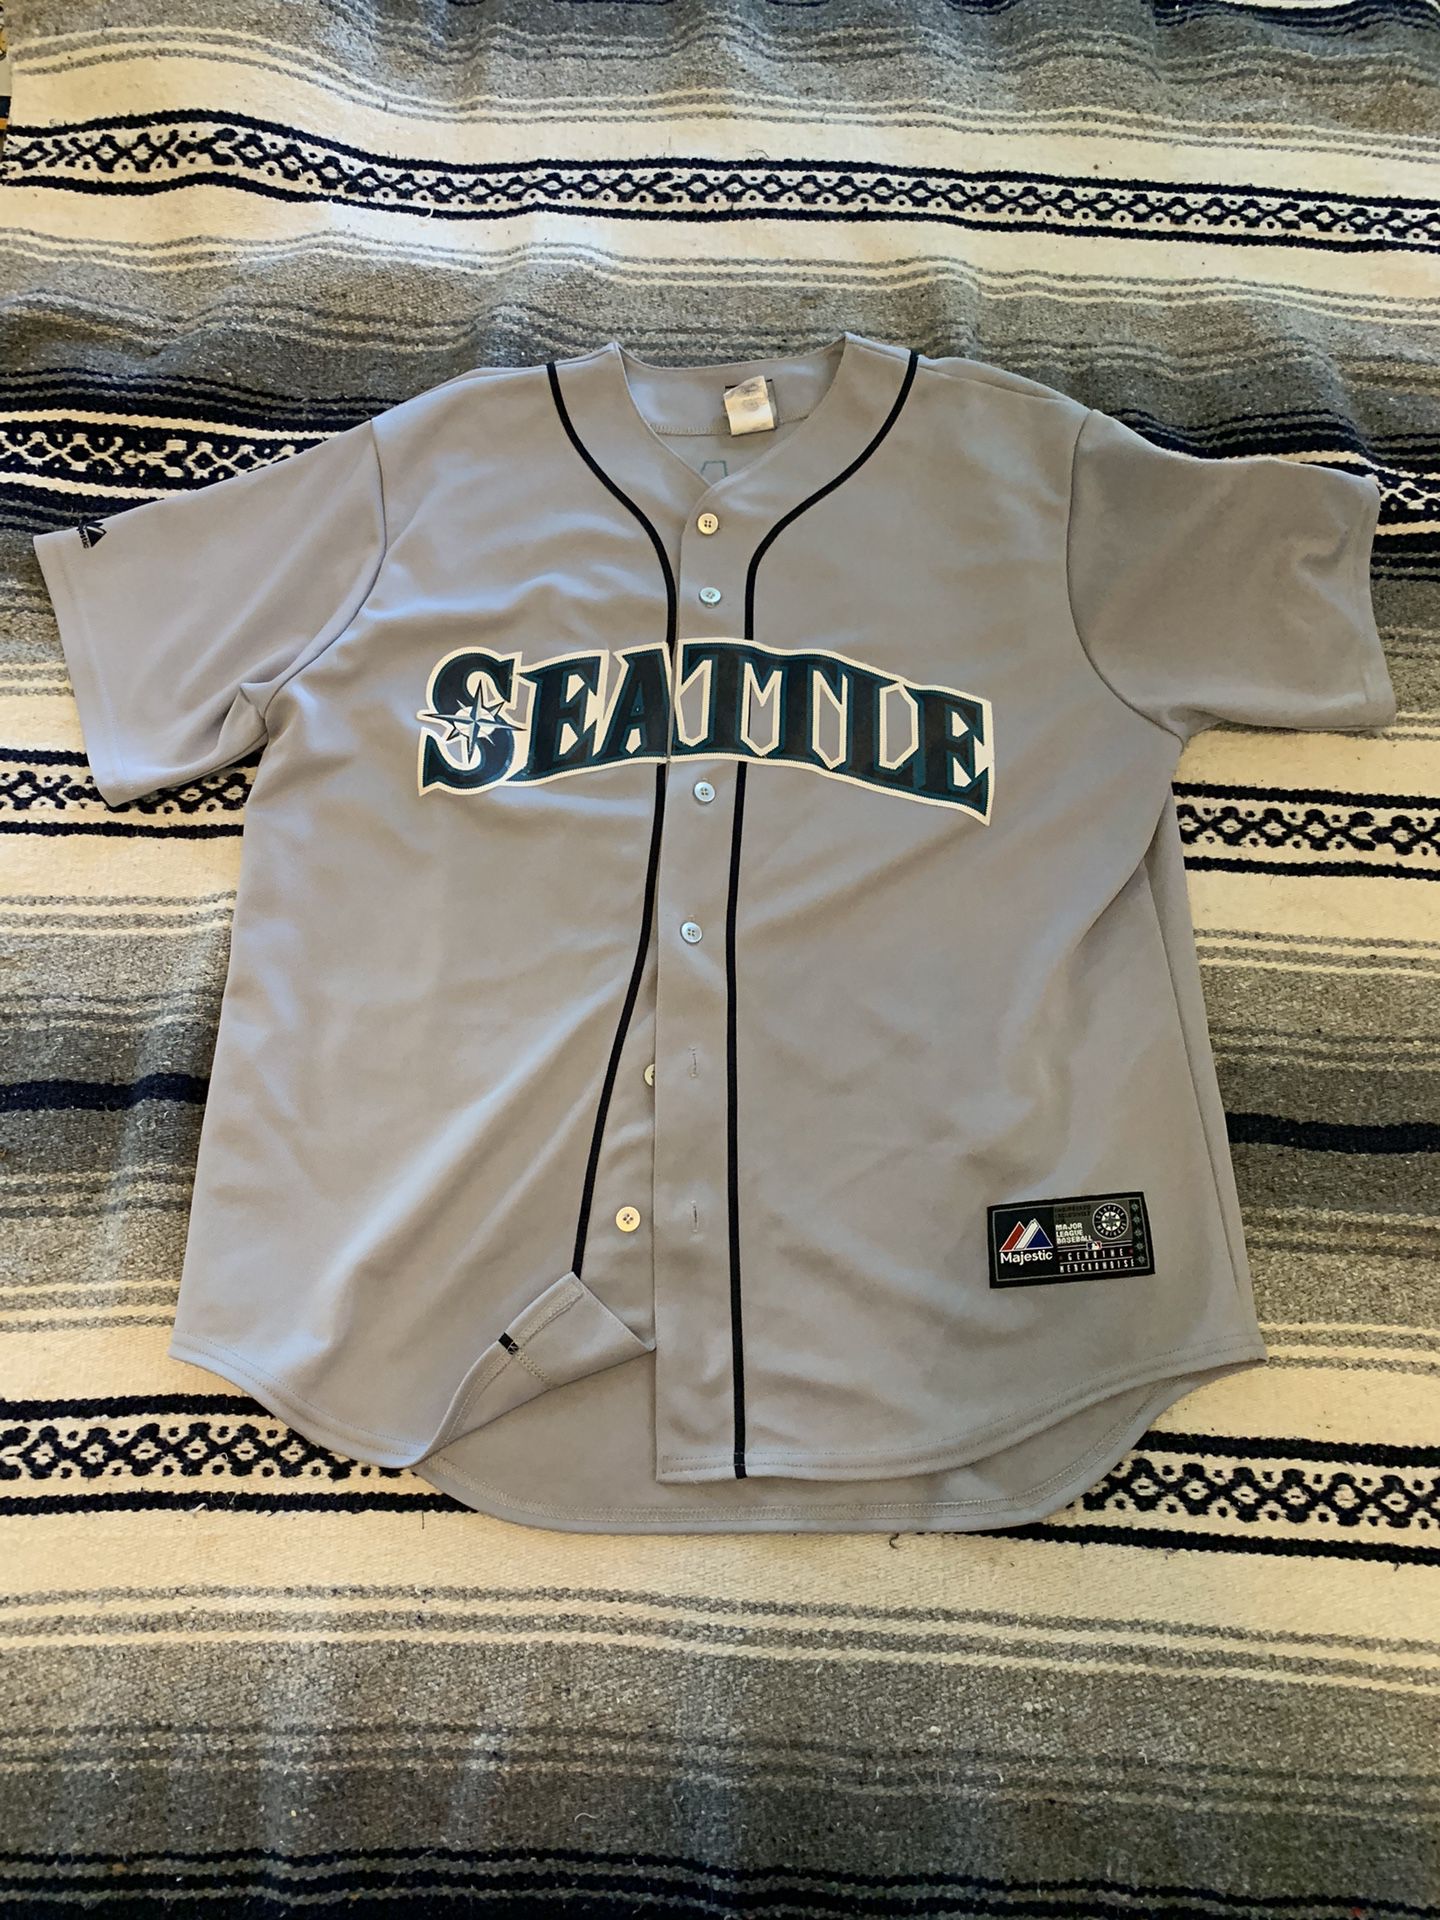 Seattle Mariners Majestic Road MLB Grey Jersey Size XL for Sale in